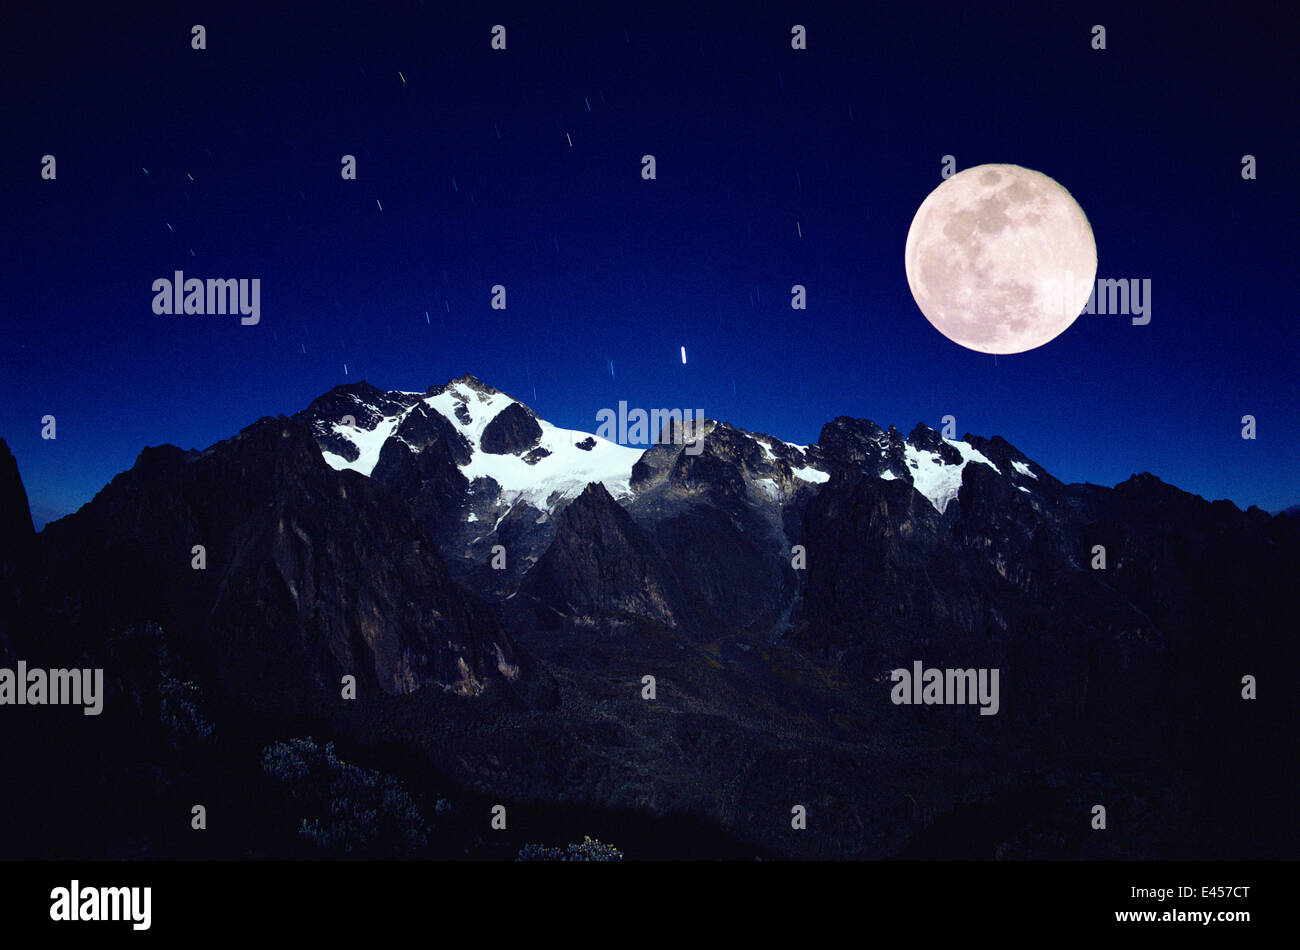 Full moon and stars over Mount Stanley, Mountains of the Moon, Ruwenzori mtns, Virunga NP, Dem Rep of Congo Stock Photo